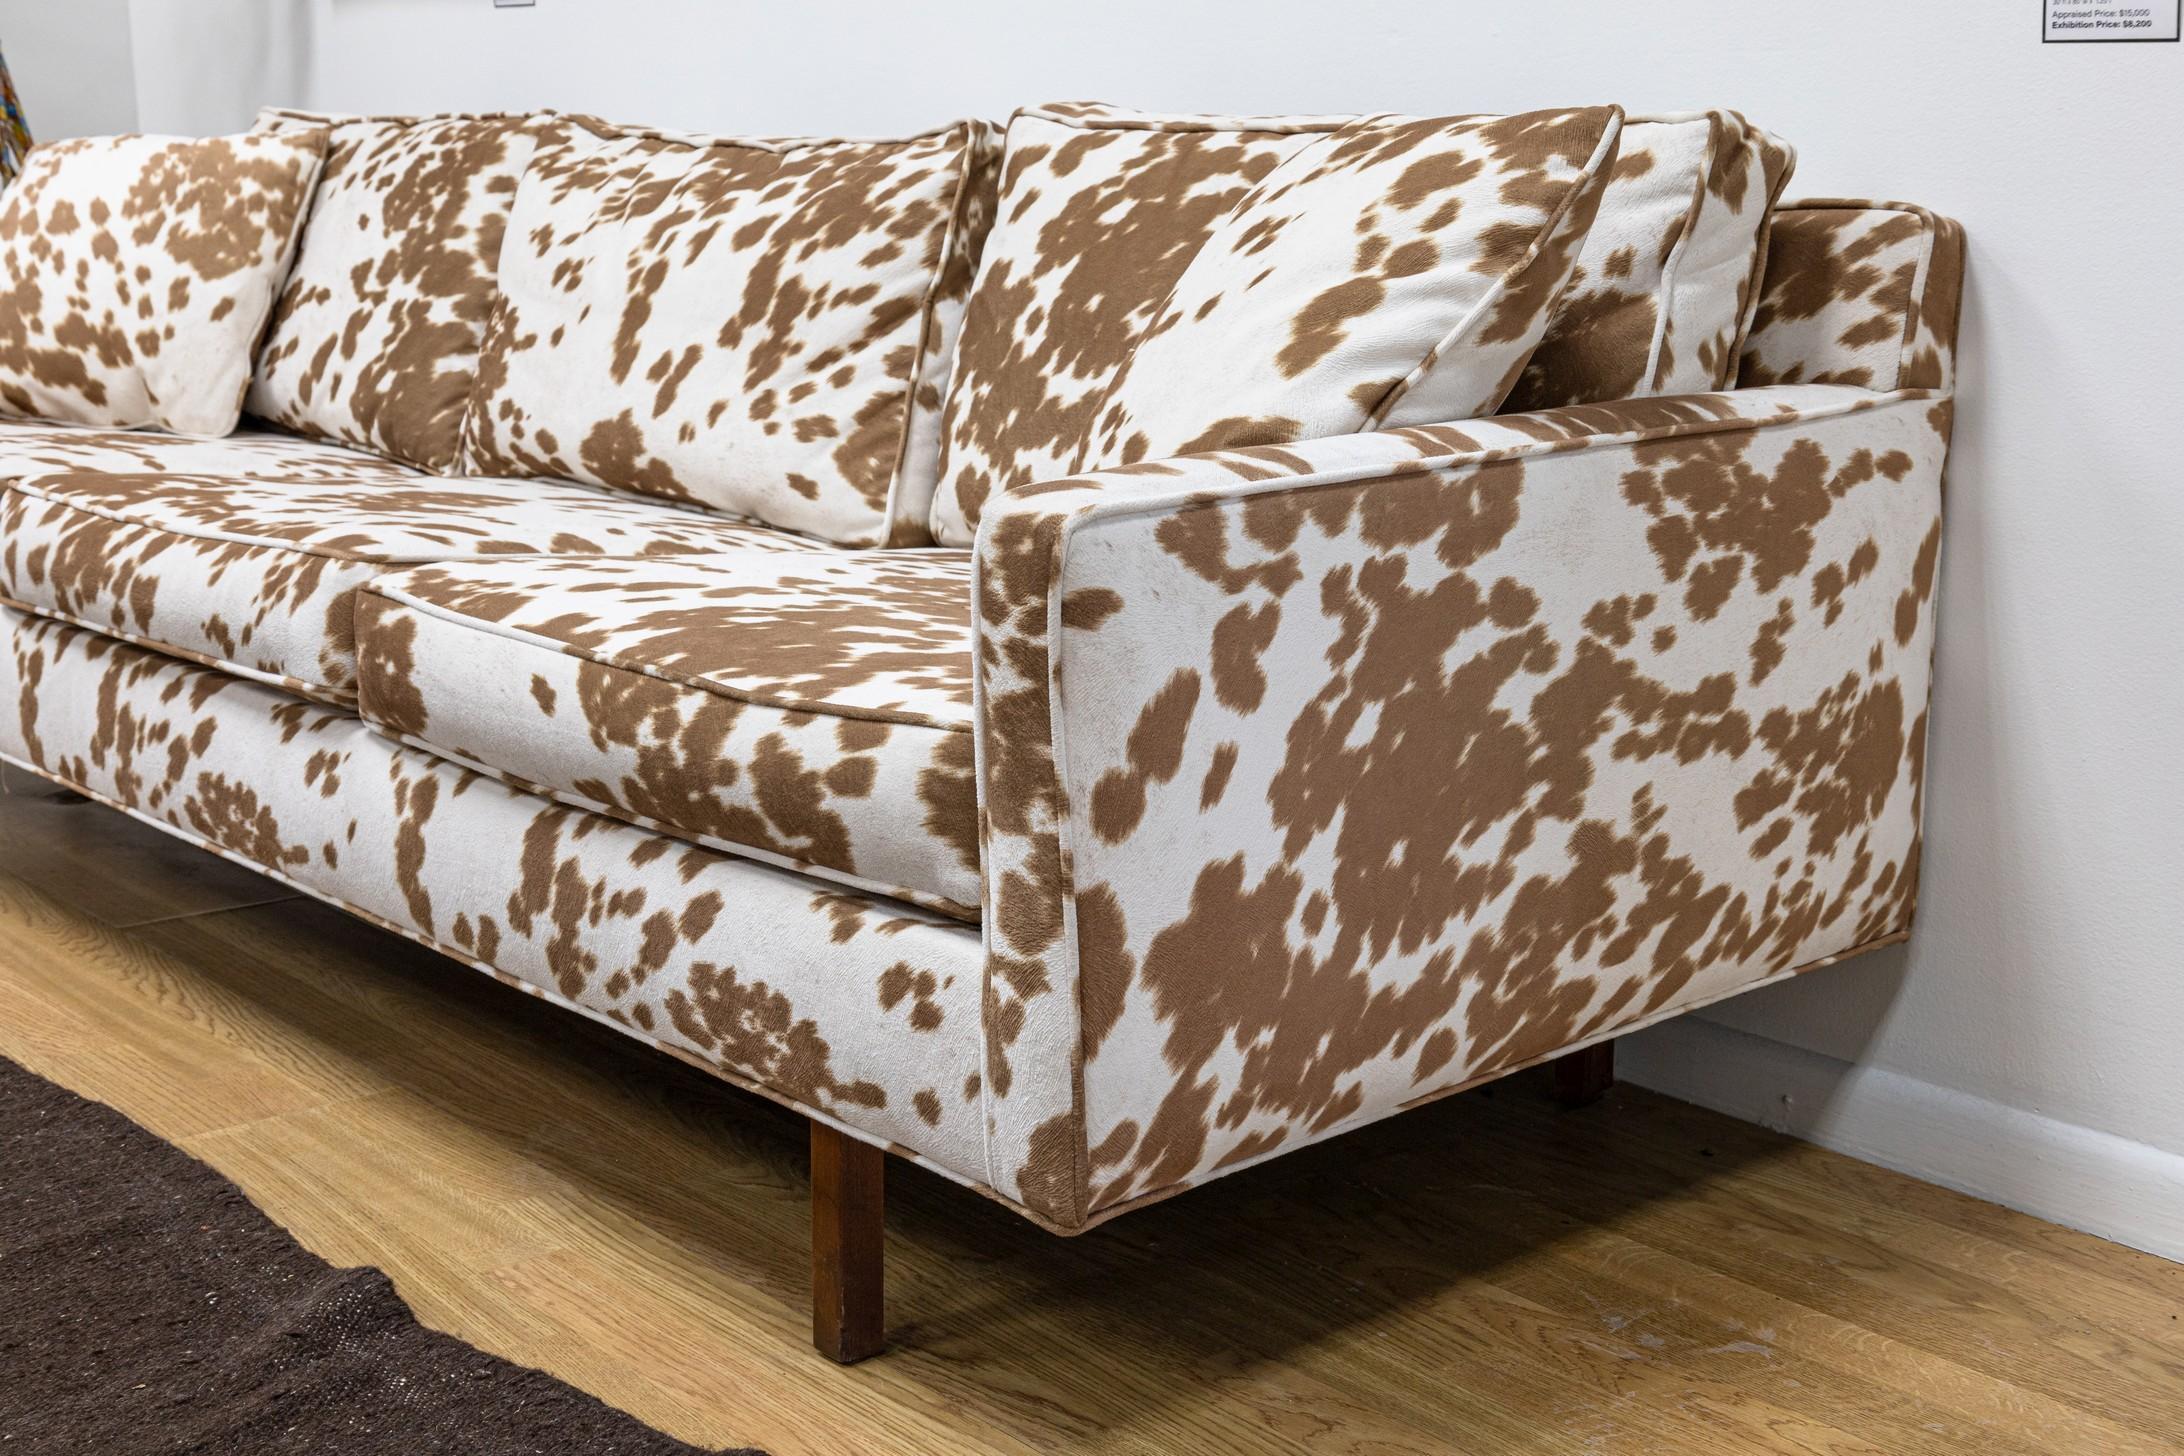 Milo Baughman Style Directional Sofa with Cow Print Fabric and Wooden Legs For Sale 3